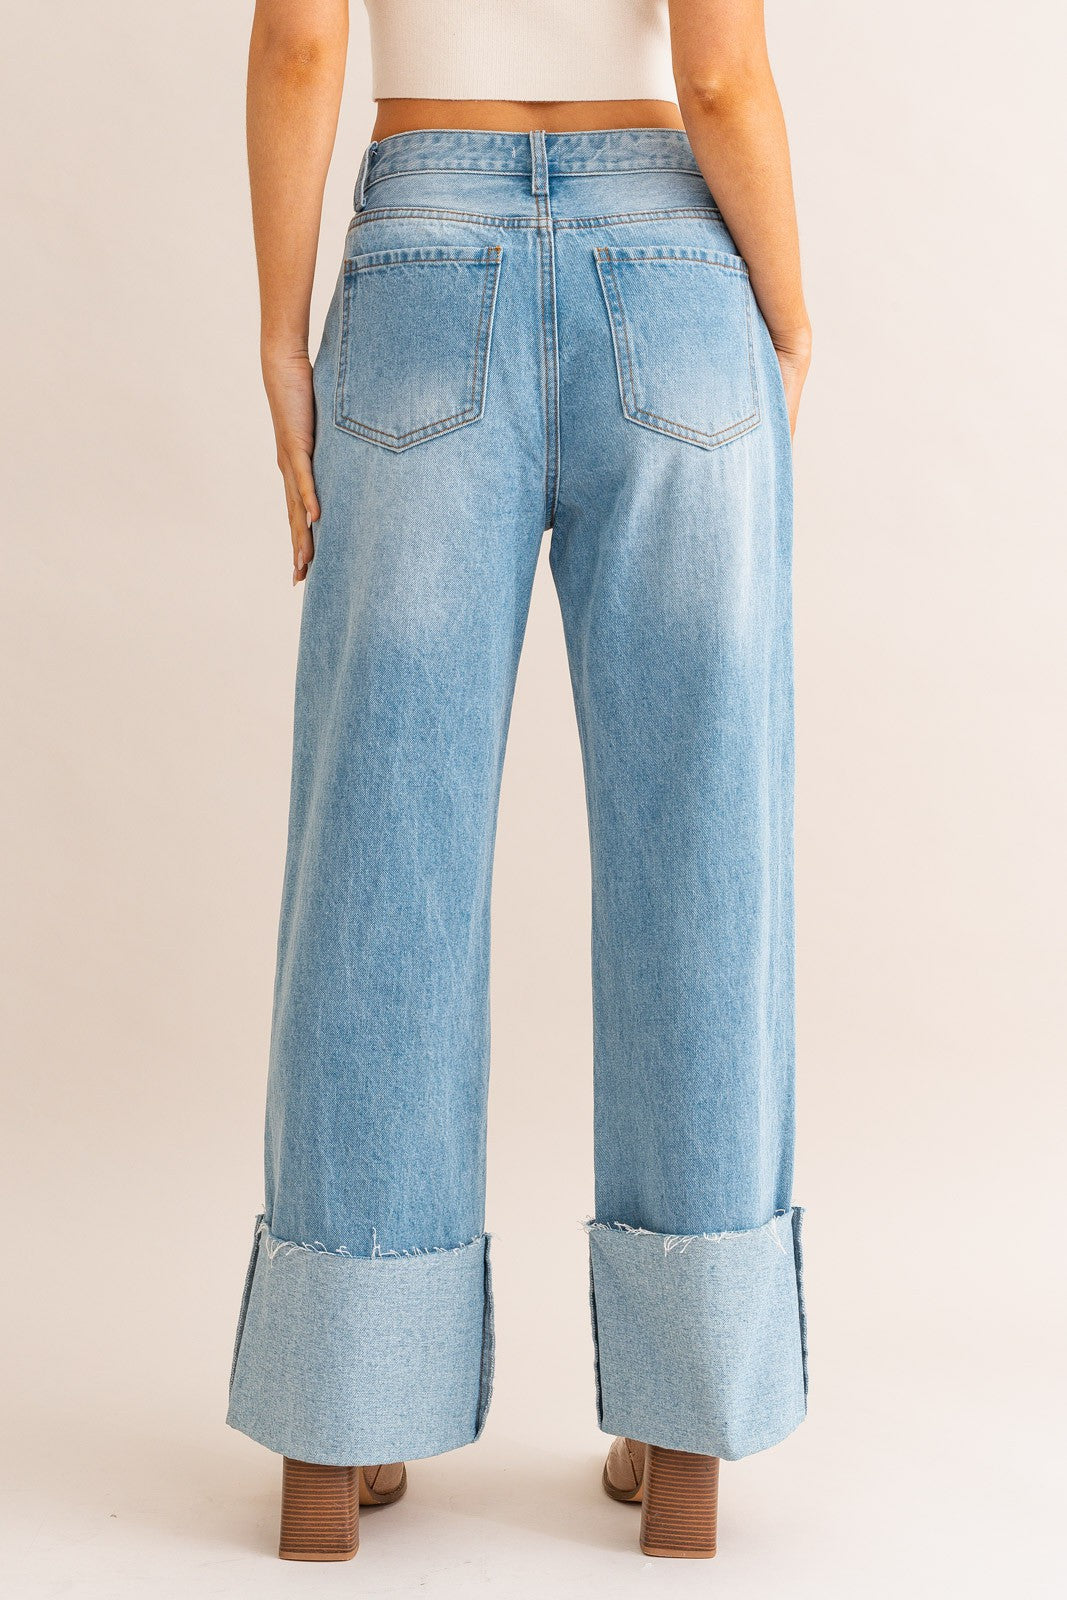 The Paxton Jeans